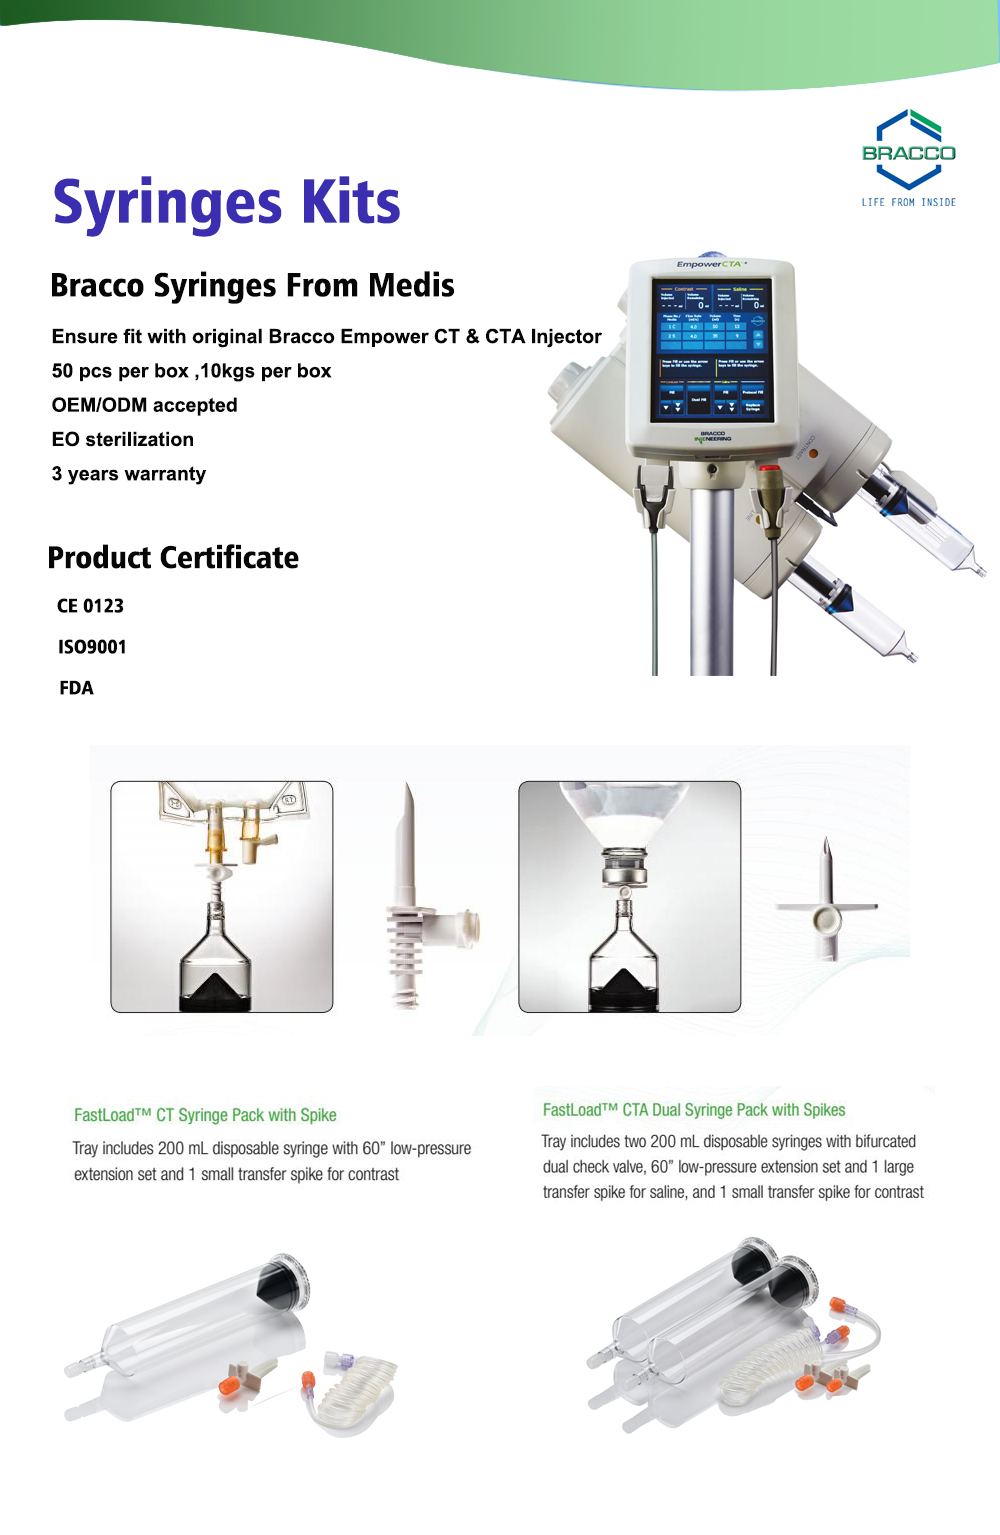 Disposable High Pressure Angiographic Syringes for Bracco EZEM Empower CT & Empower CTA Injection System-contrast media injectors-high pressure syringes-single use disposable 200ml syringes -Prefilled syringes-ct scan injector syringes-ct contrast media injector syringes